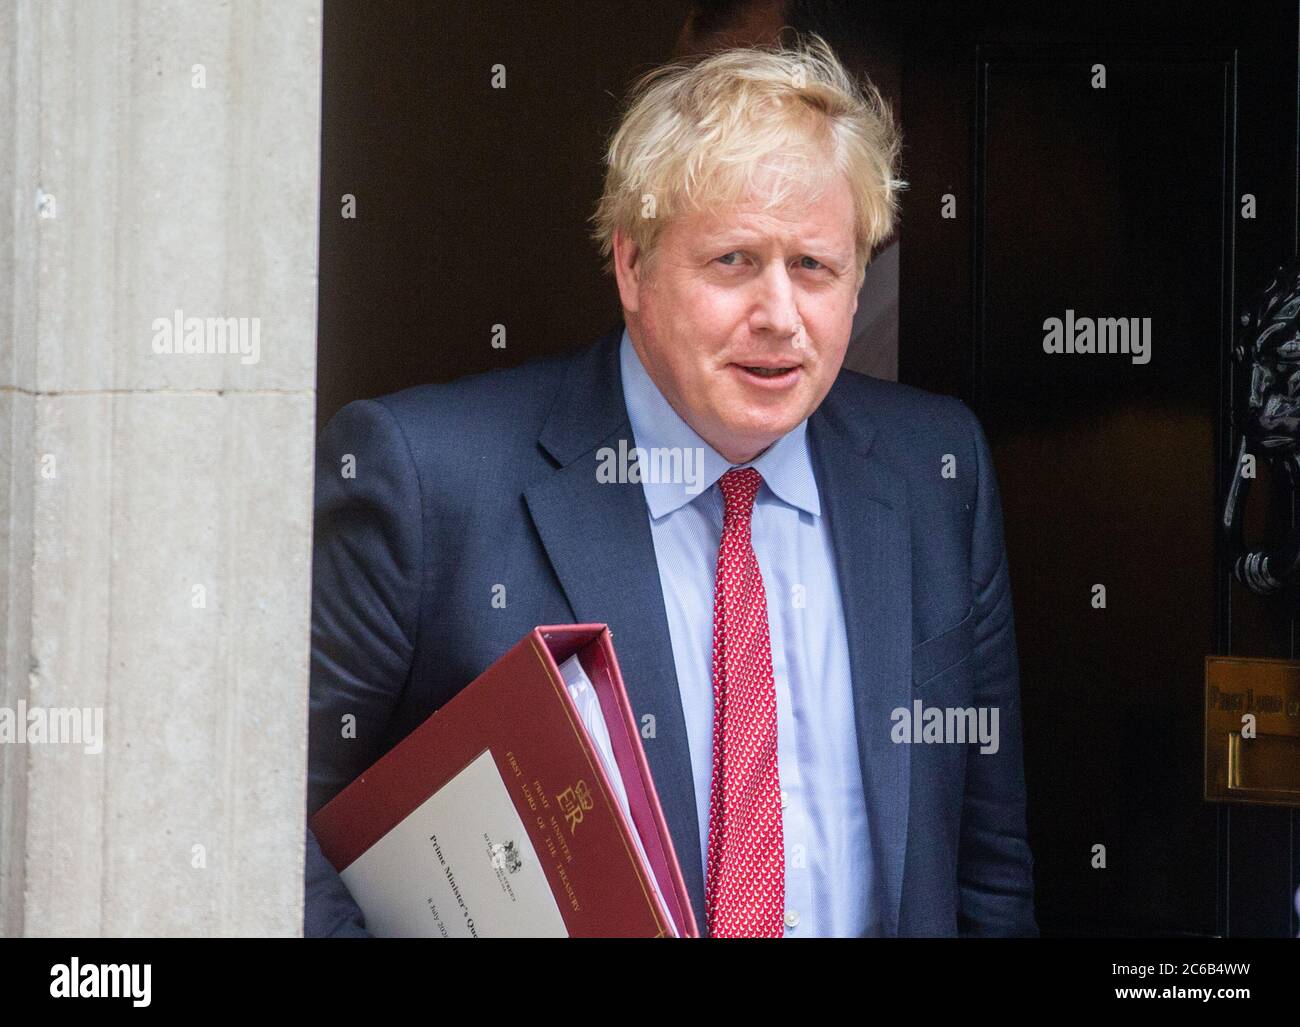 London, UK. 8th July, 2020. Prime Minister of the UK, Boris Johnson, in Downing Street. Credit: Tommy London/Alamy Live News Stock Photo